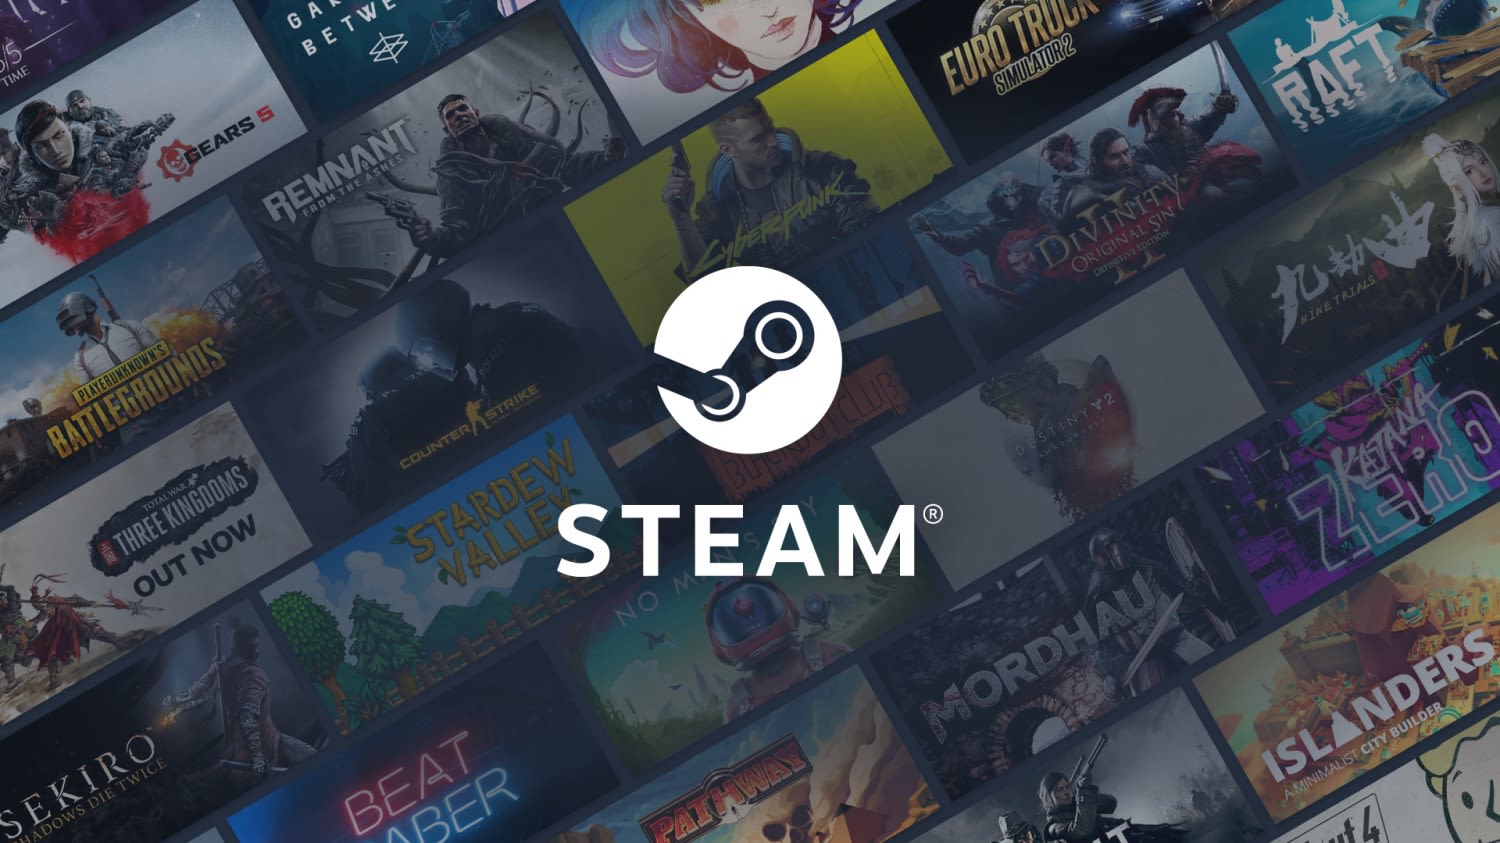 Steam Reveals Gaming Library Cannot be Passed Through Inheritance